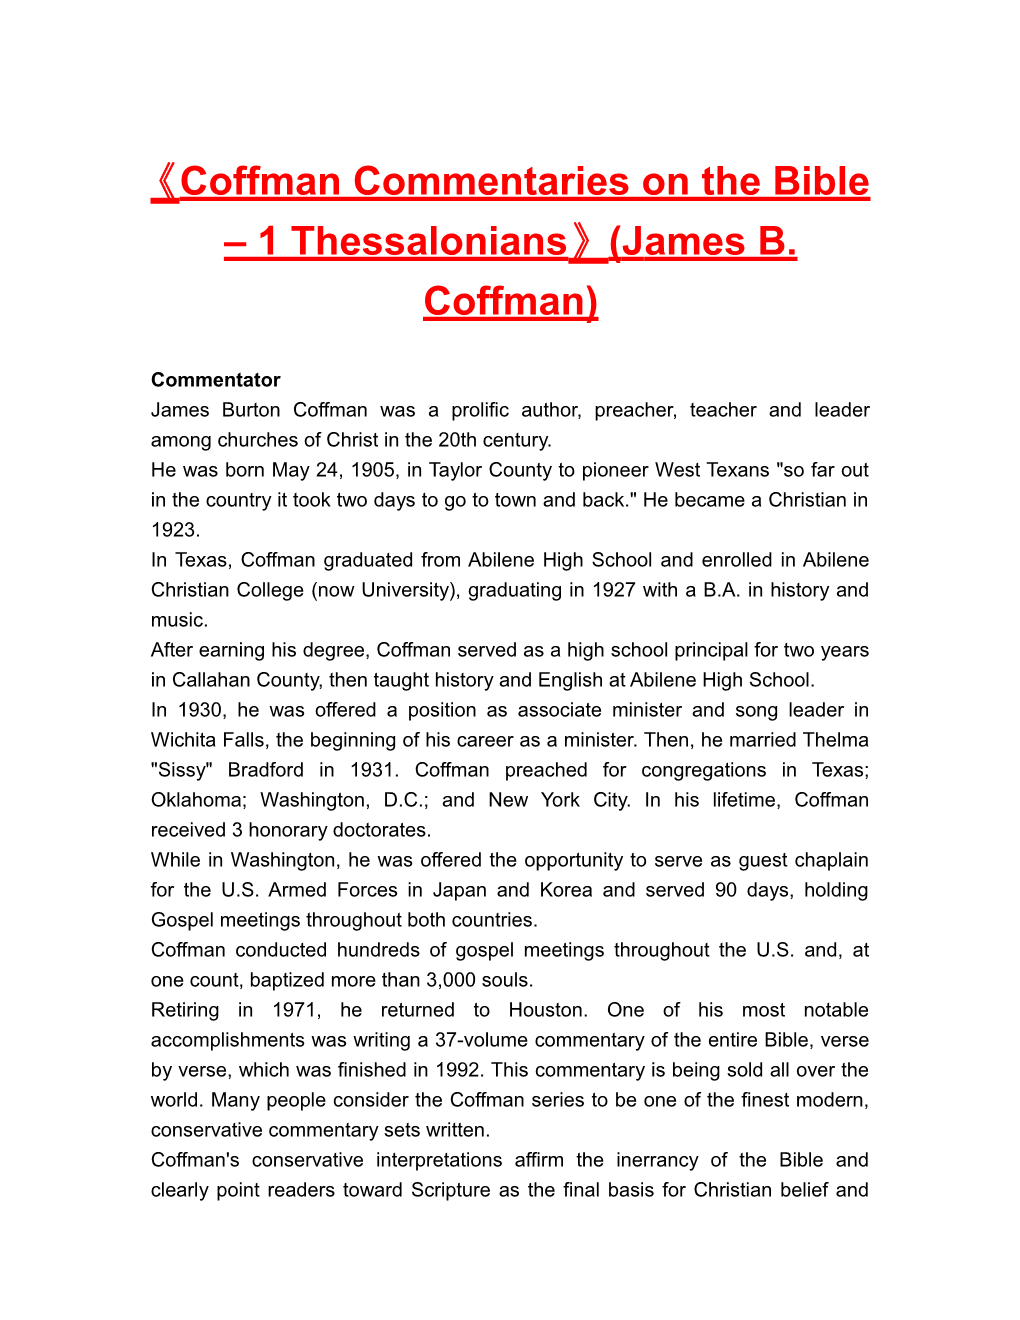 Coffman Commentaries on the Bible 1 Thessalonians (James B. Coffman)